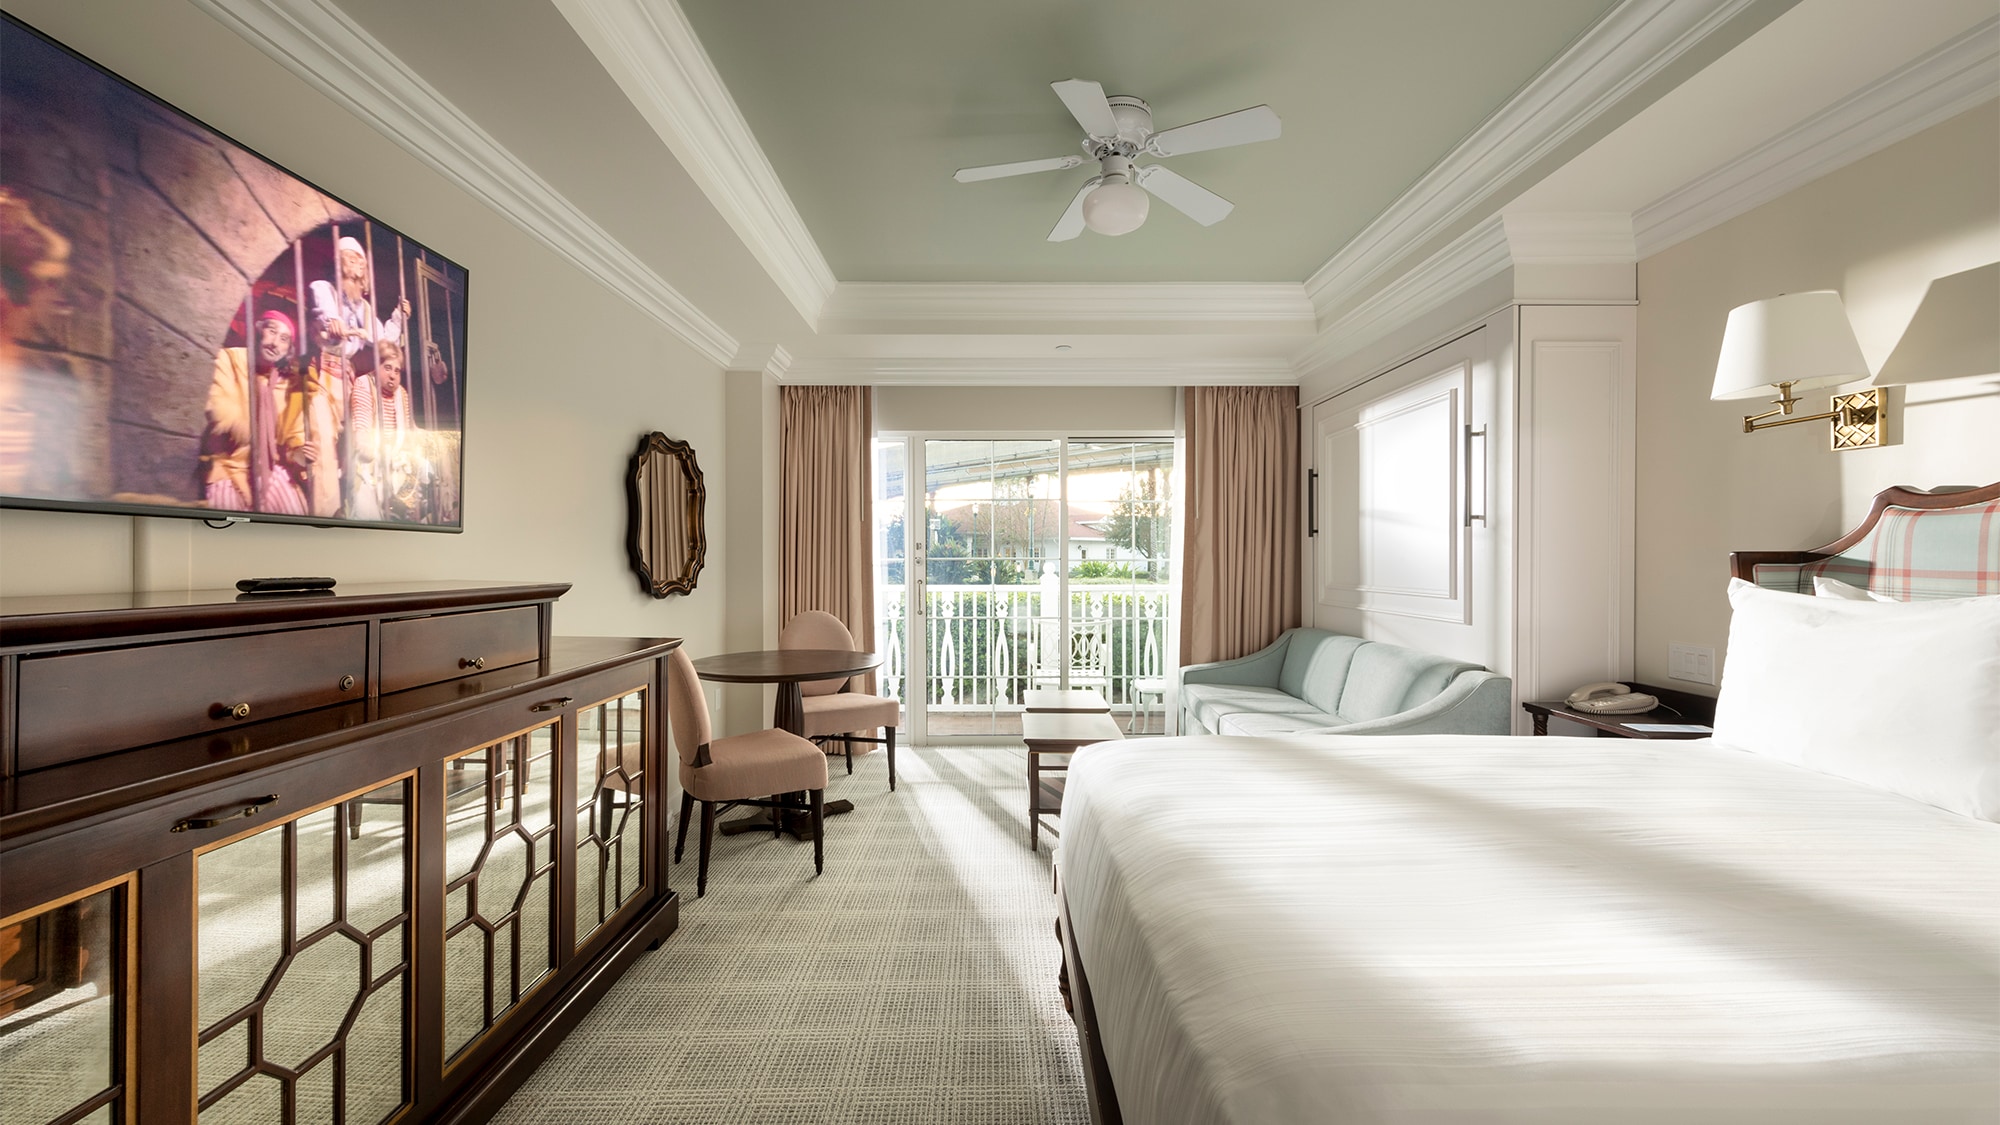 Rooms & Points The Villas at Disney's Grand Floridian Resort & Spa